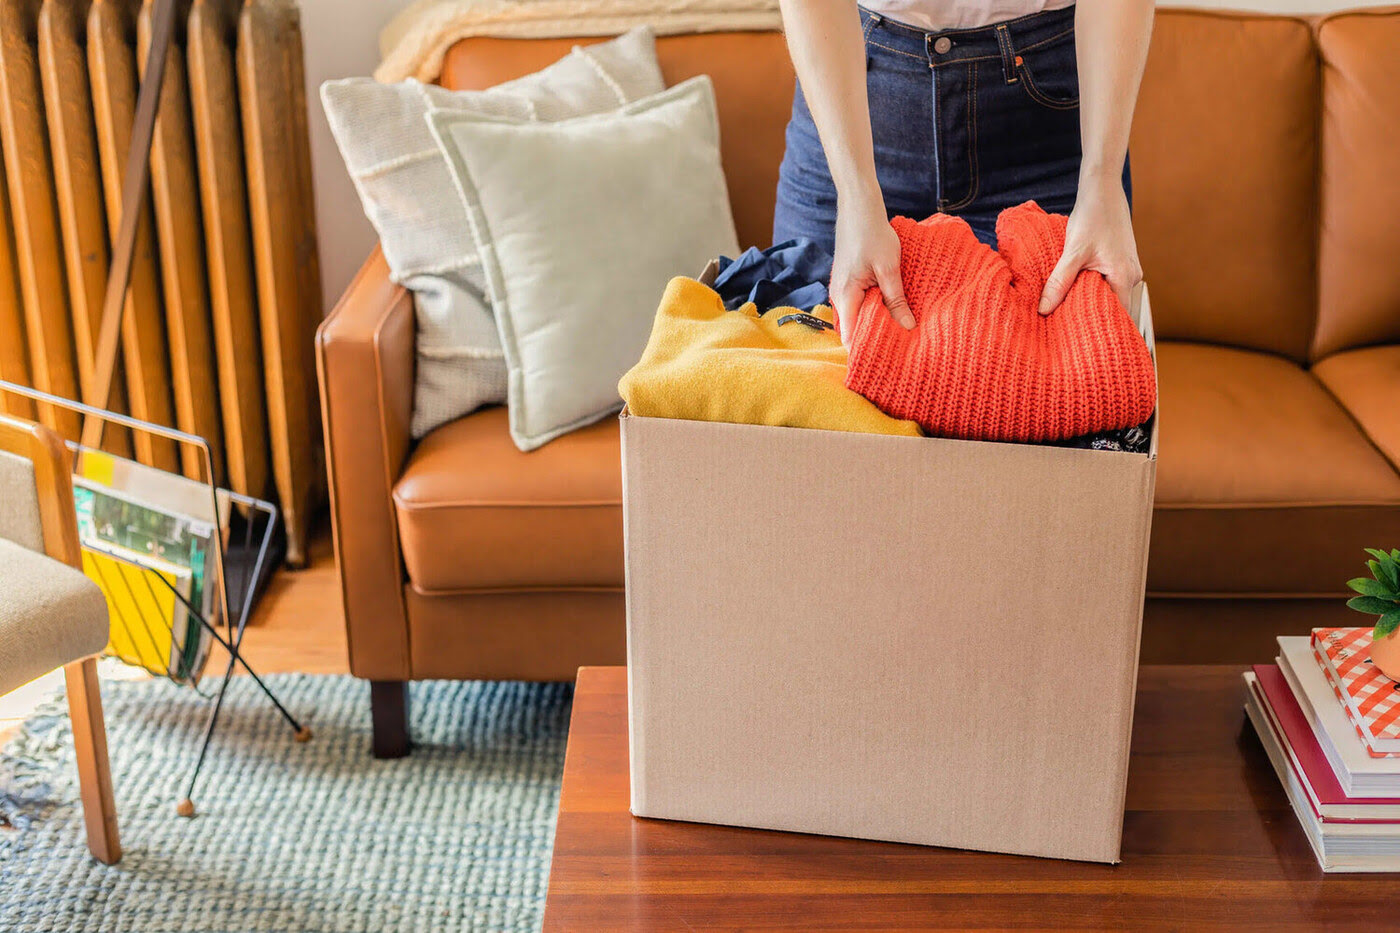 Where To Start When Decluttering, According To Organizers